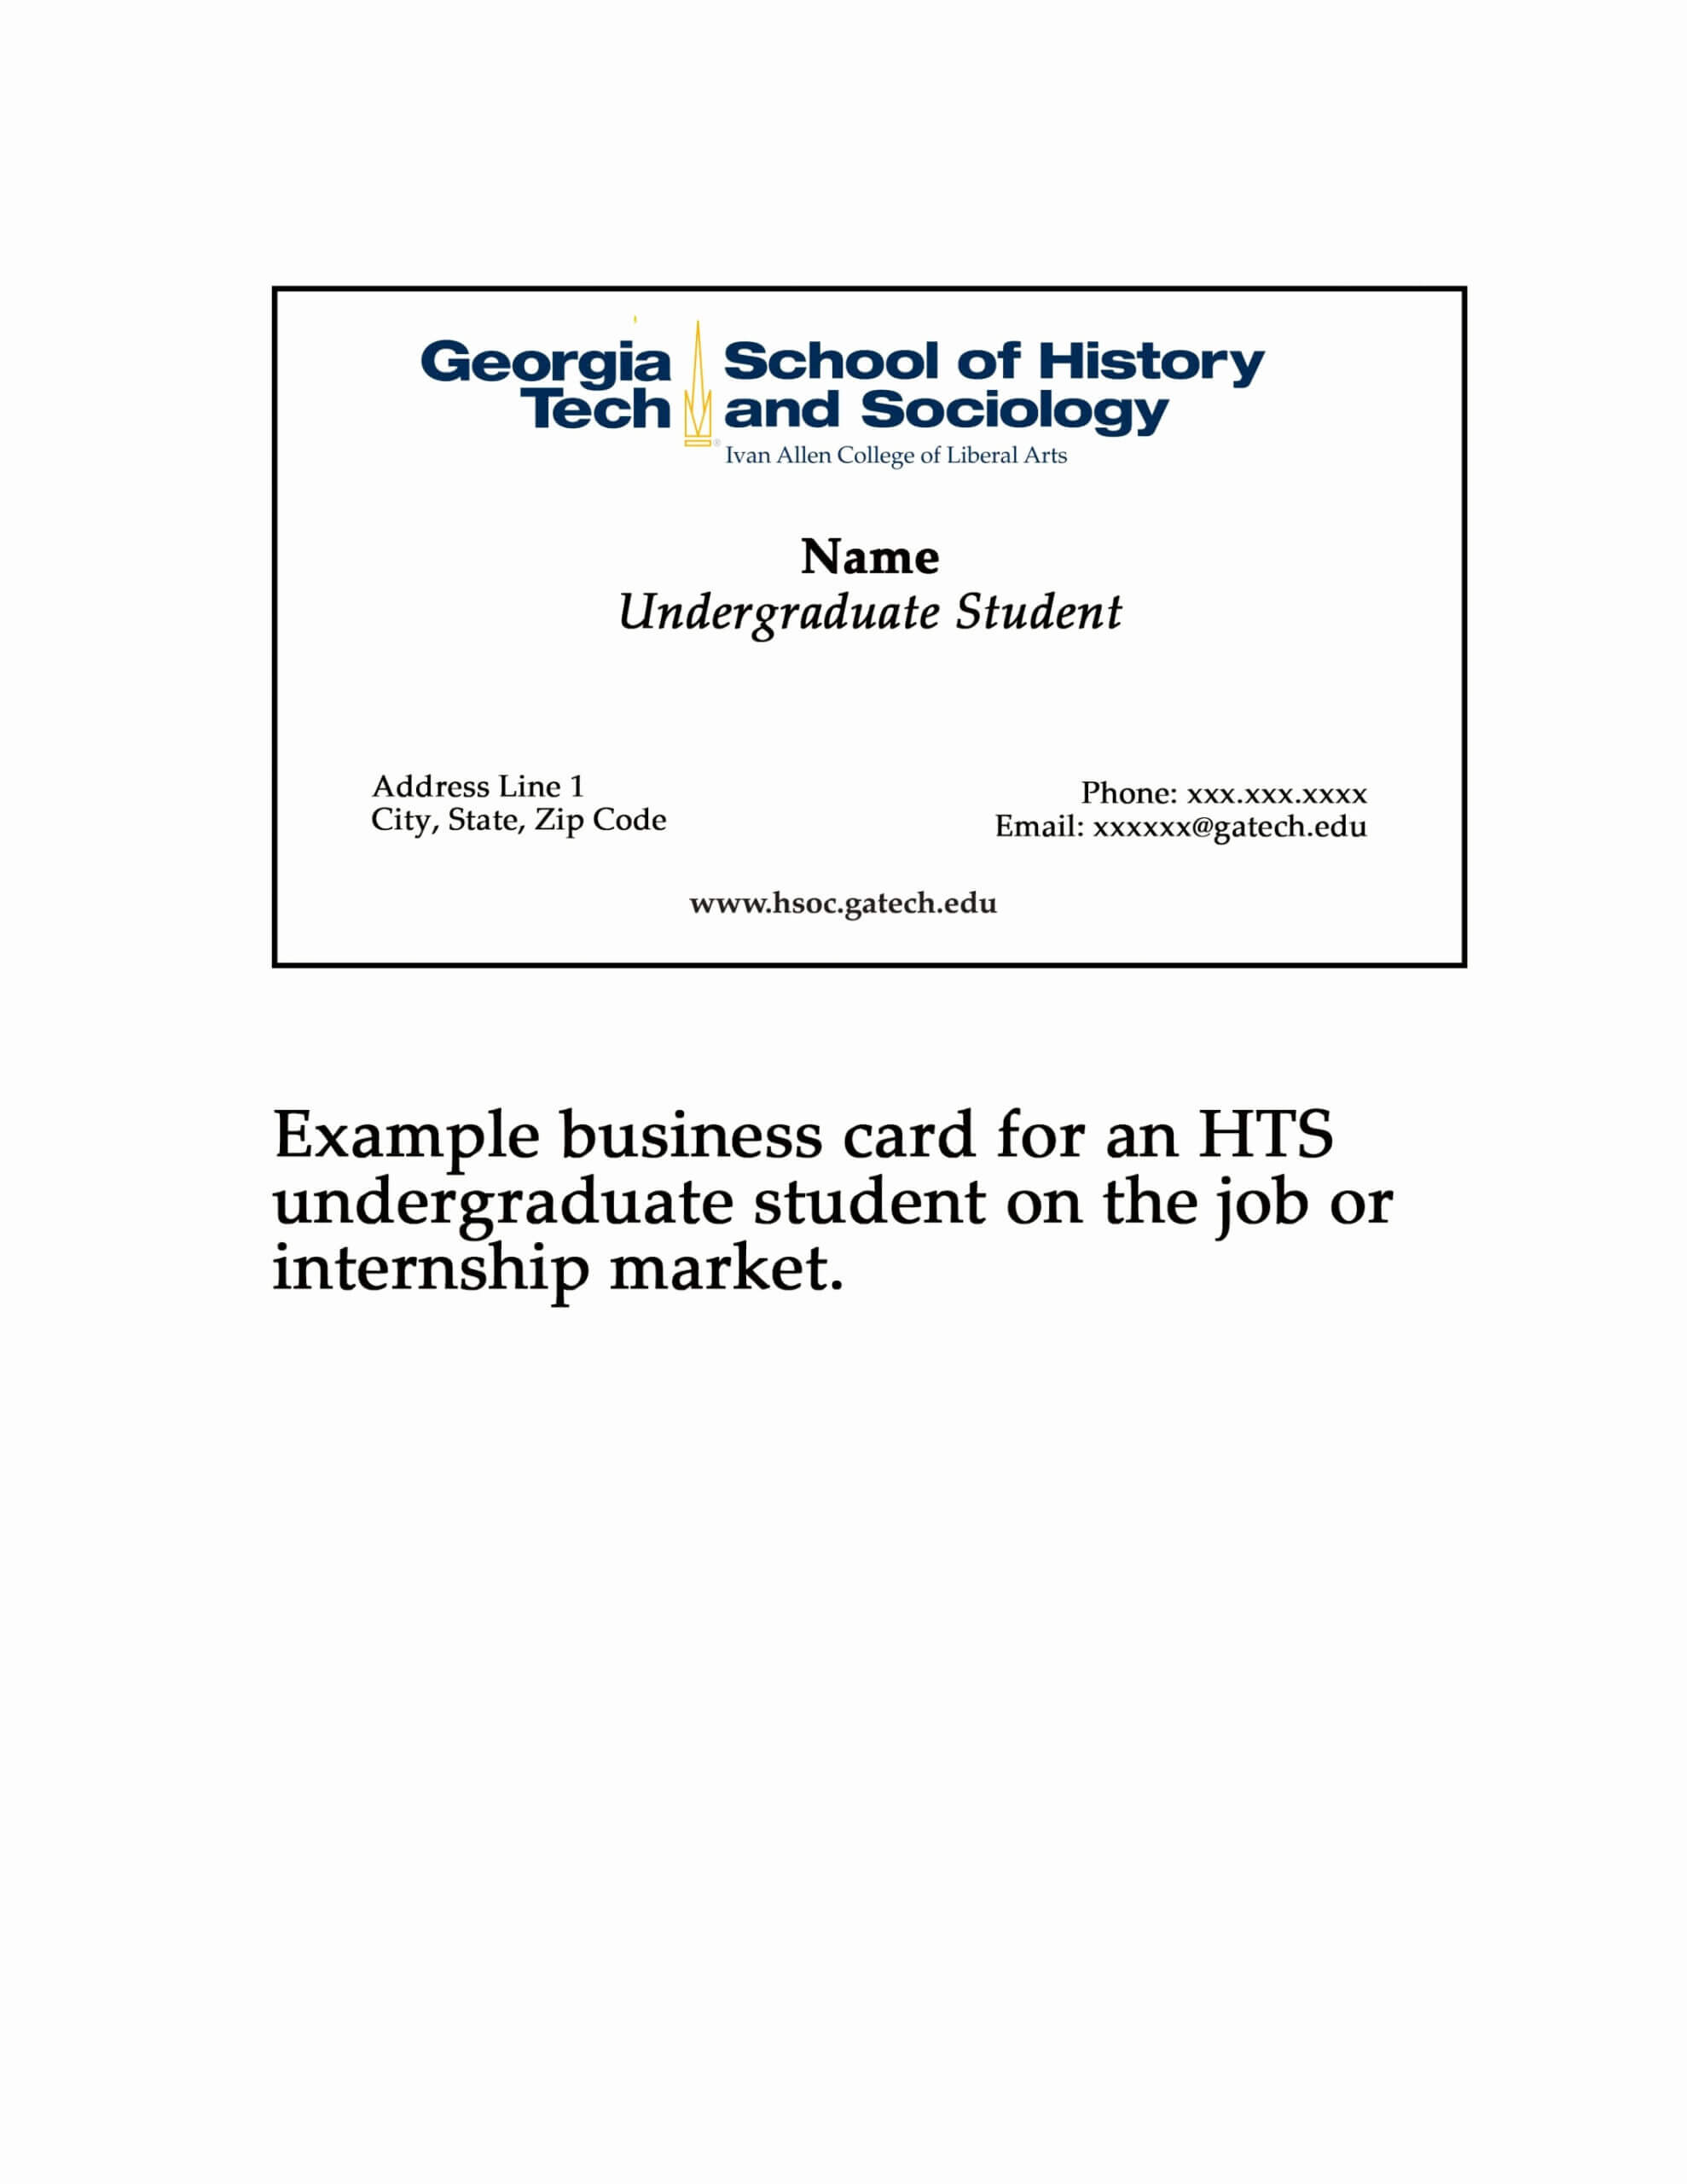 10 Graduate Student Business Card Example | Proposal Letter Intended For Graduate Student Business Cards Template